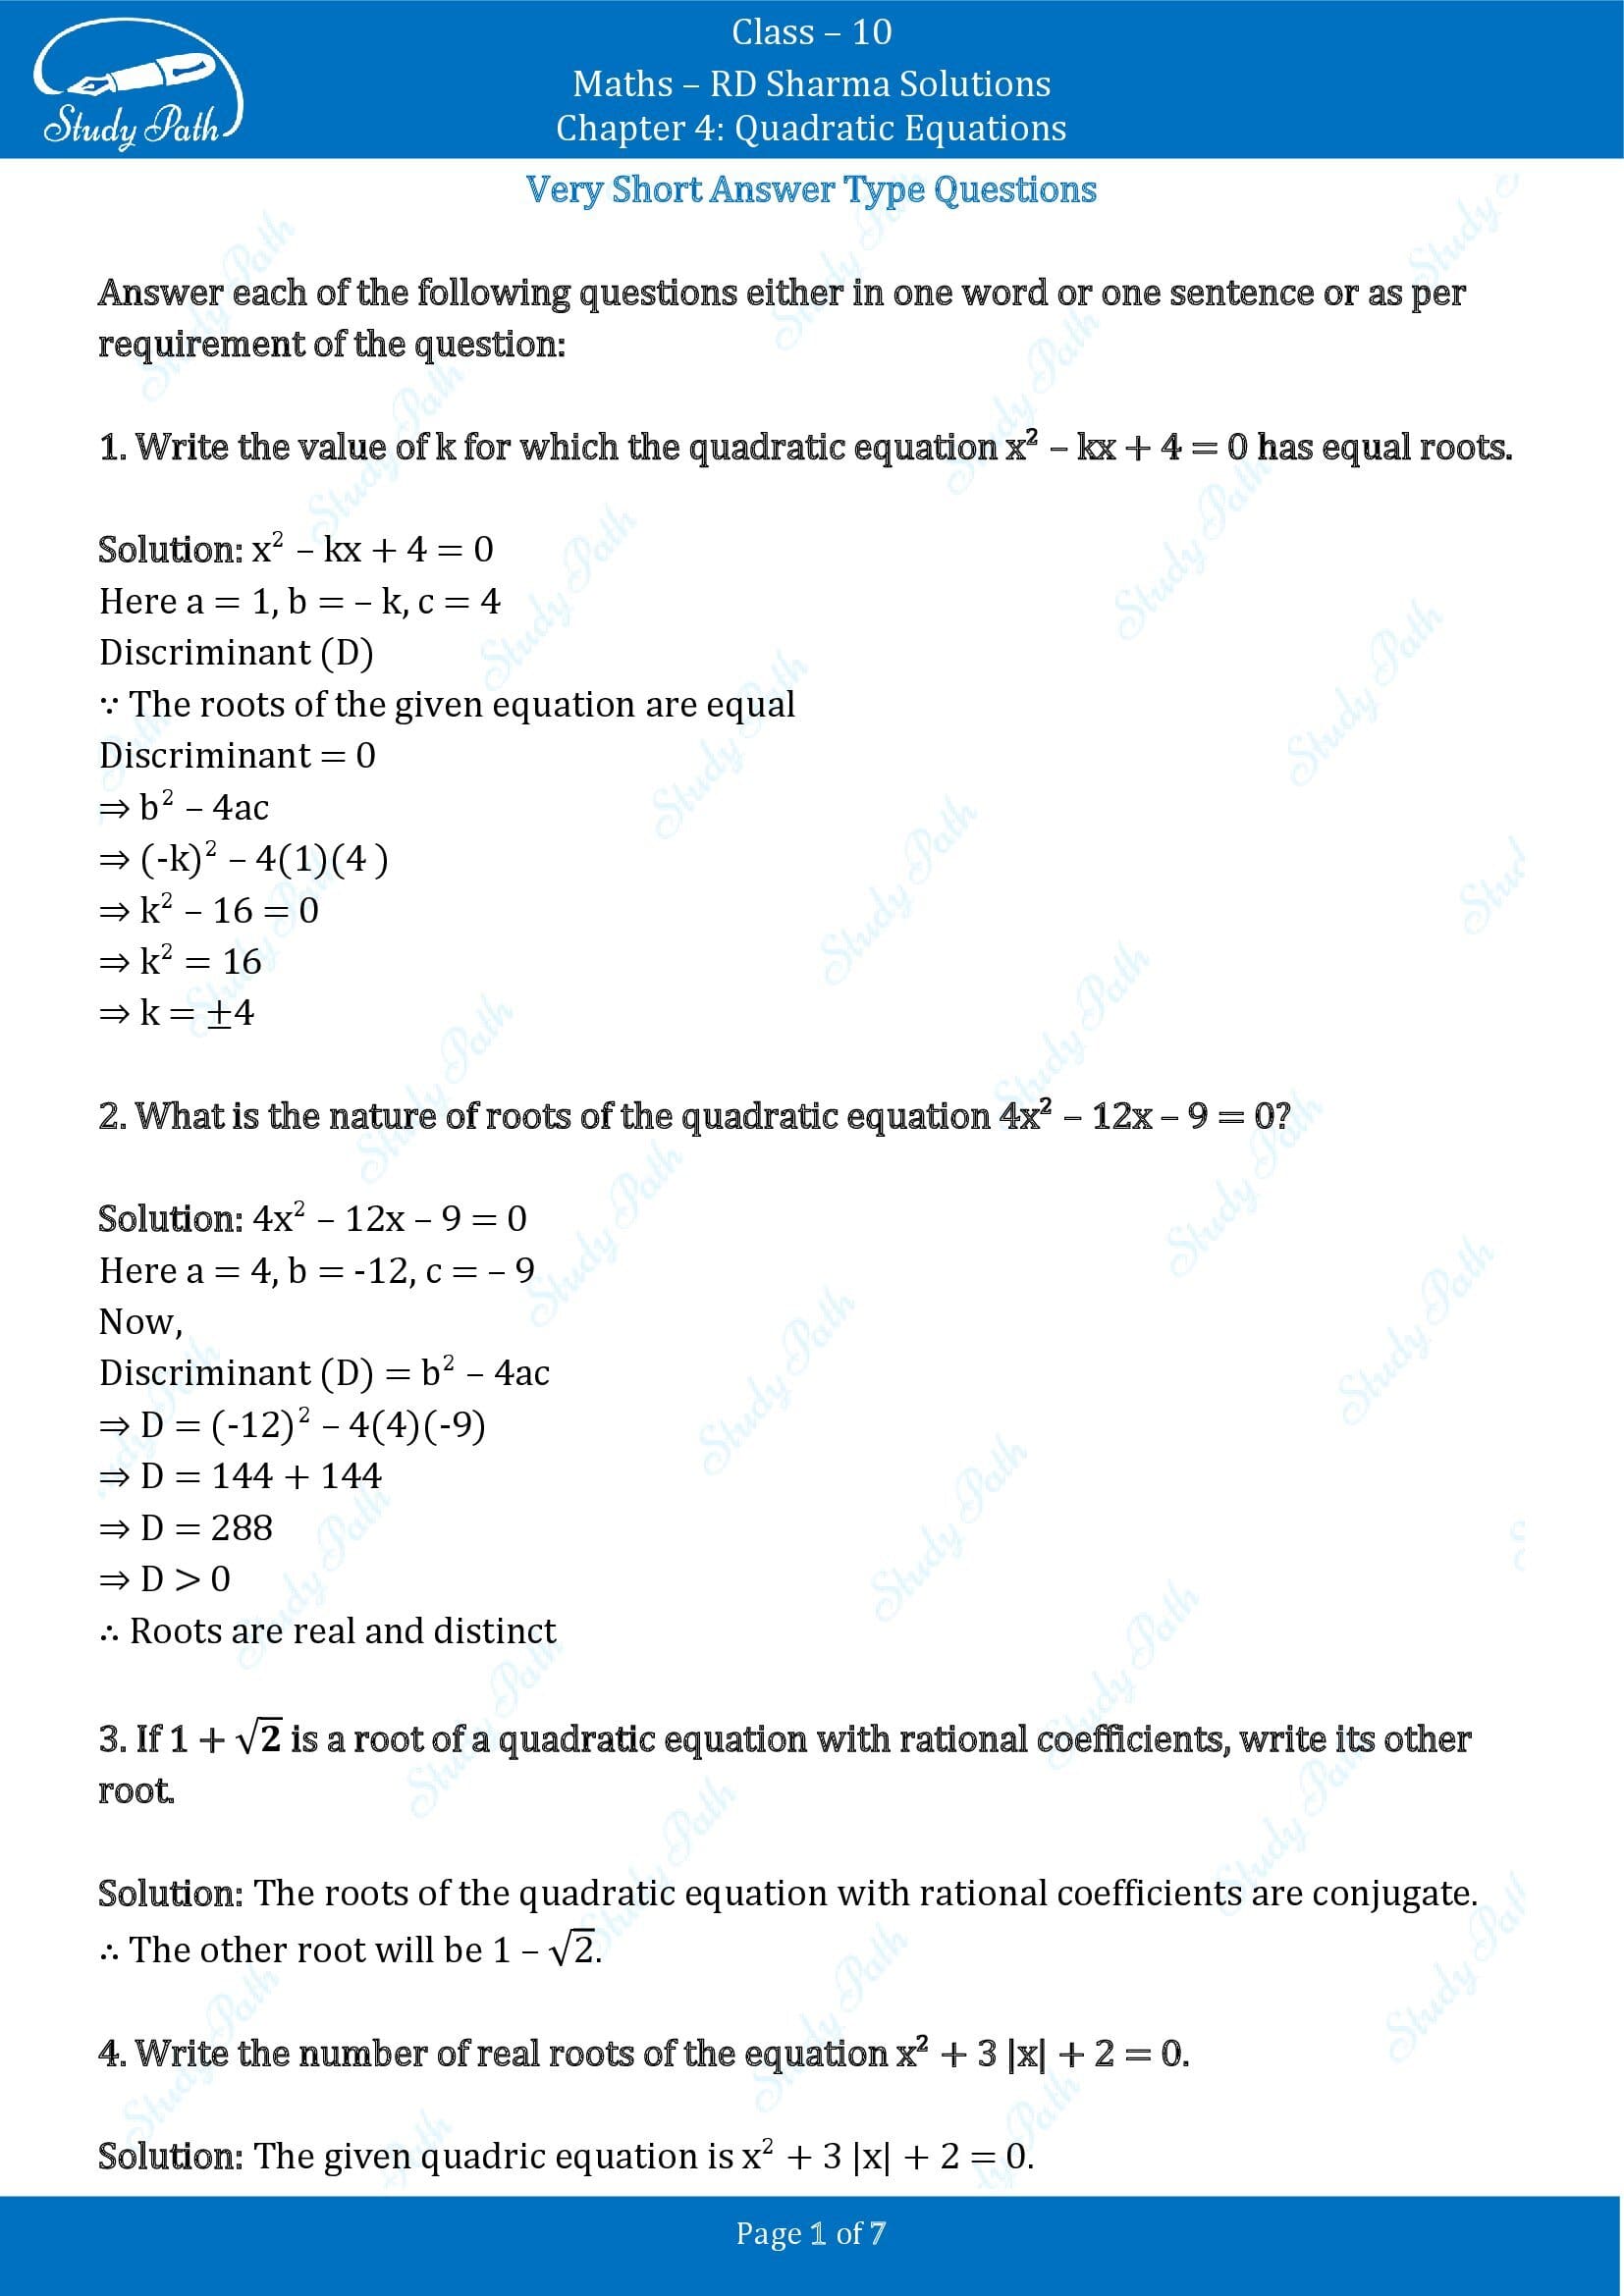 RD Sharma Solutions Class 10 Chapter 4 Quadratic Equations Very Short Answer Type Questions VSAQs 00001